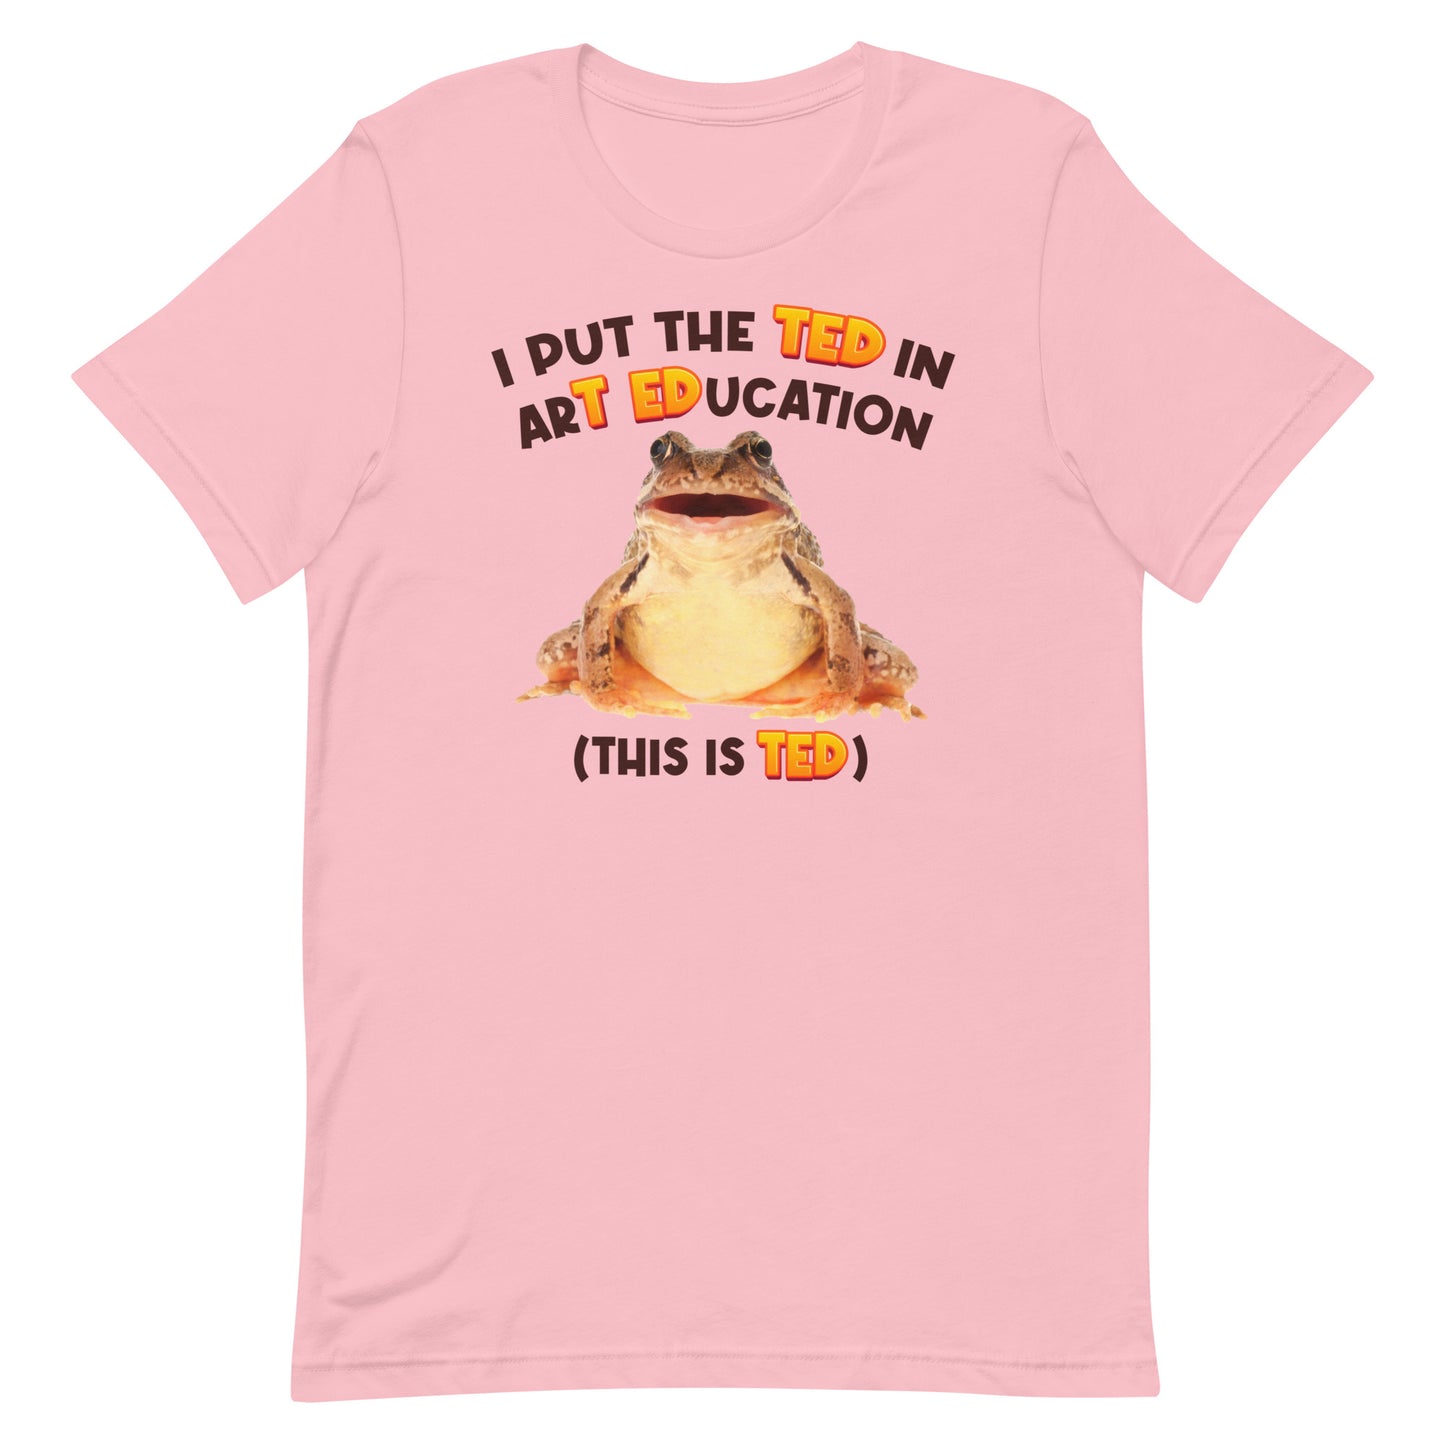 I Put the TED in arT EDucation Unisex t-shirt